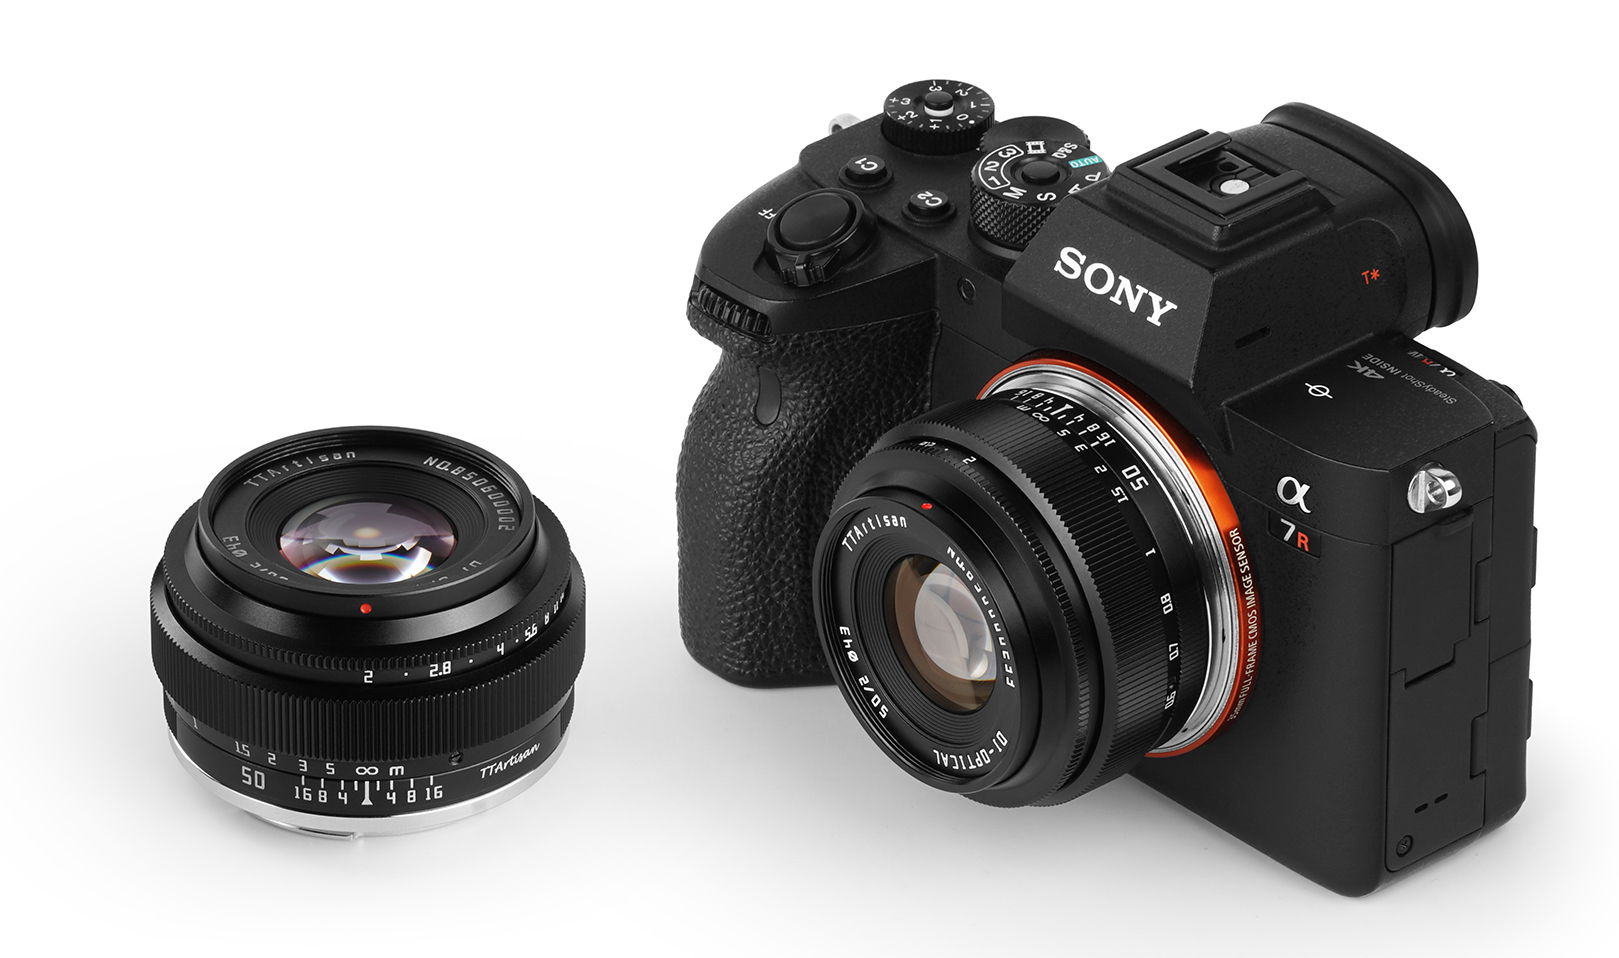 The E-mount TTArtisan 50mm F2 lens shown on a Sony a7R camera body